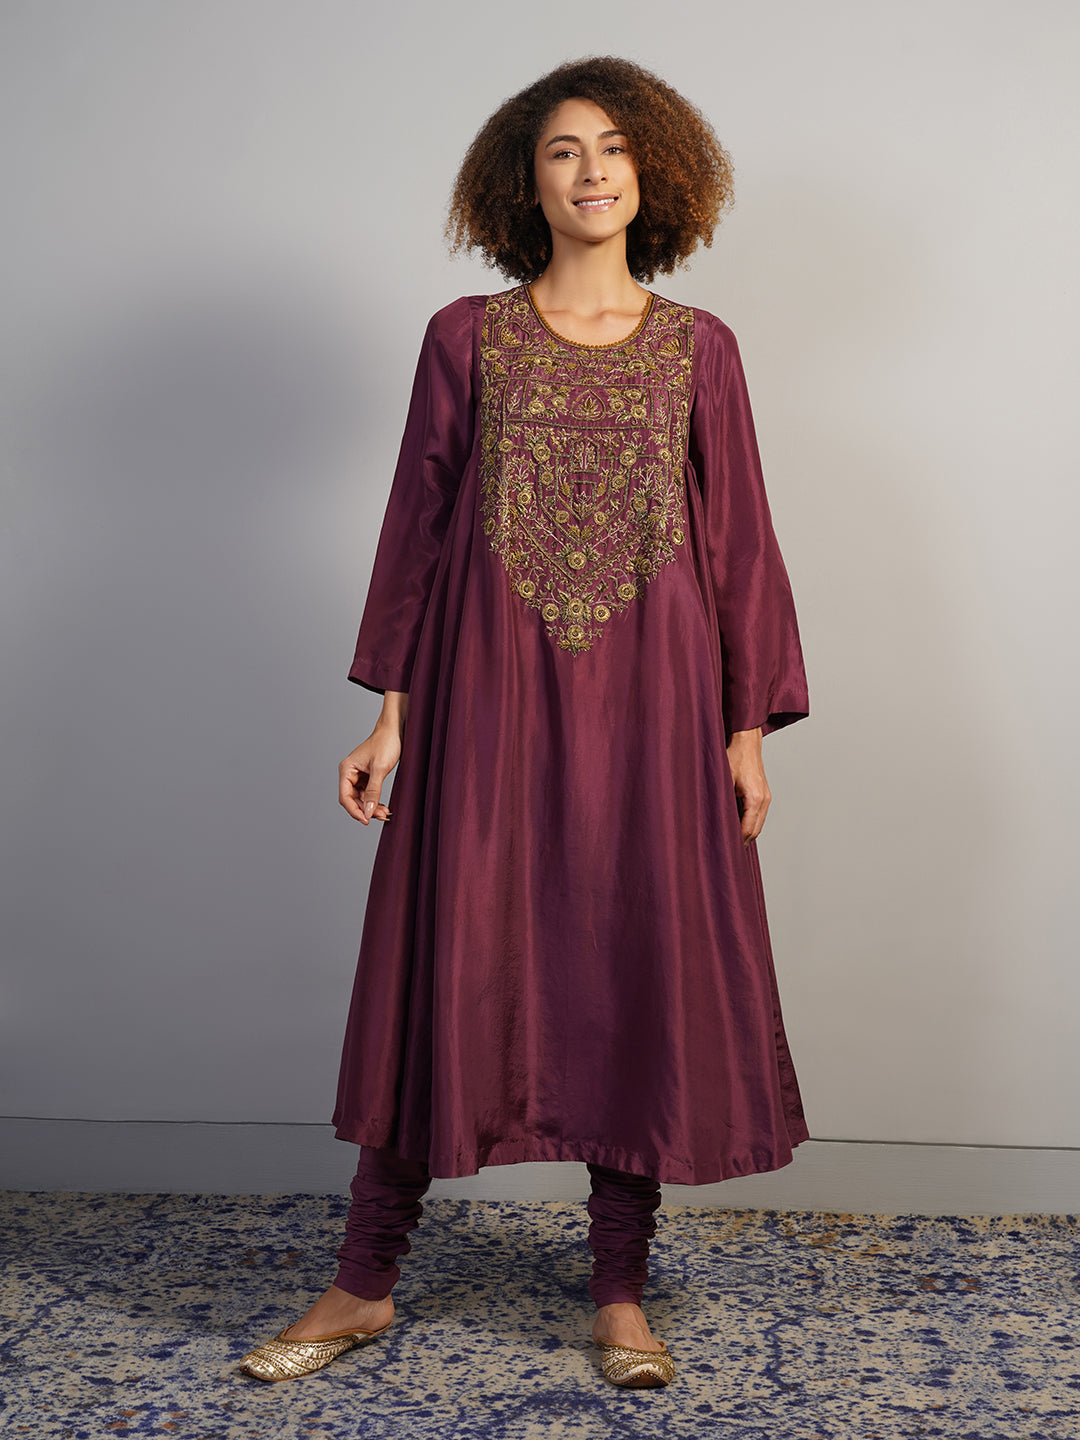 A beautiful deep wine A-line, round neck kurta set with gathers on the sides and intricate gold zardosi embroidery